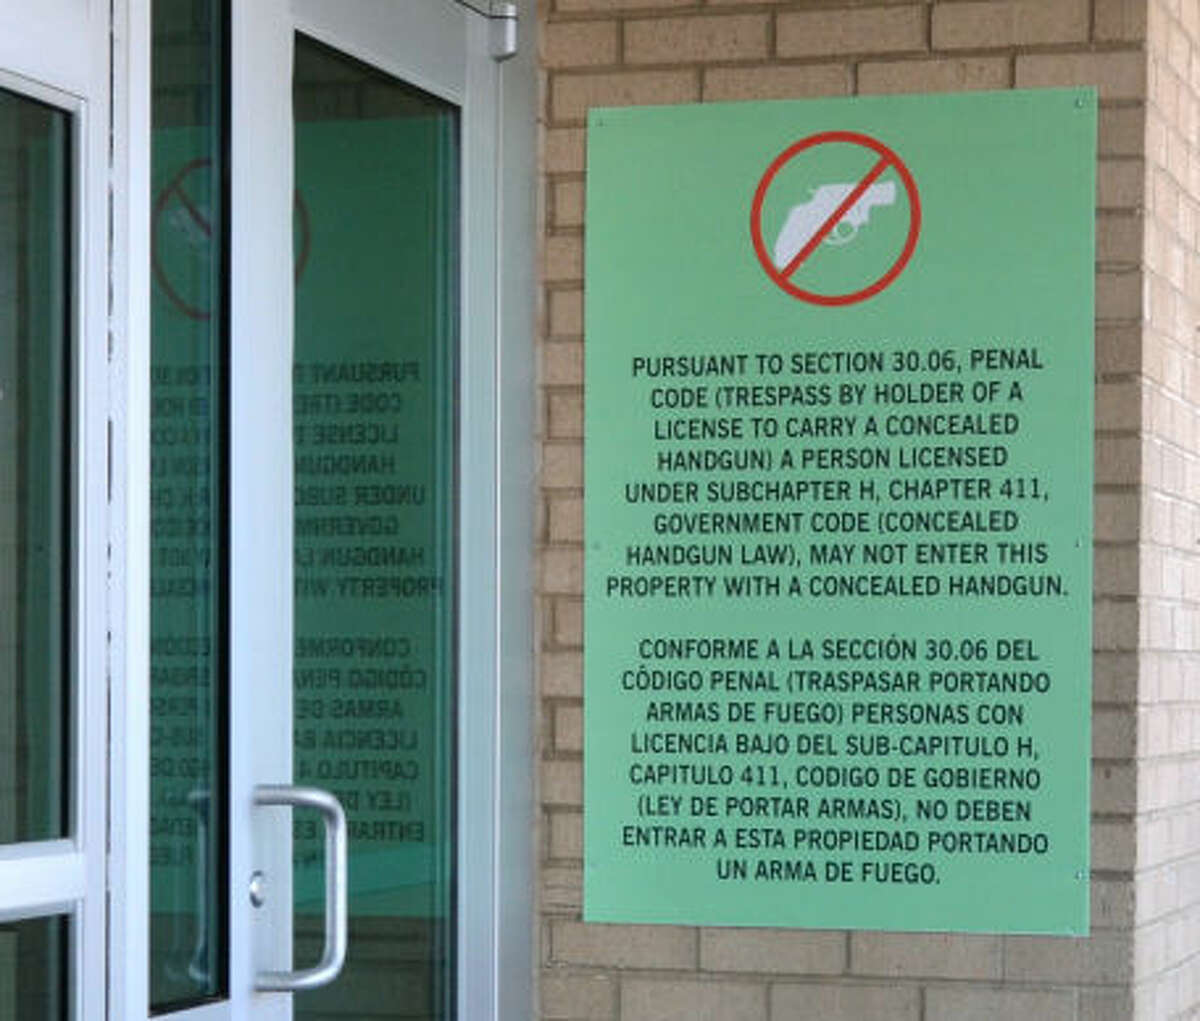 A sign posted outside Midland Park Mall bans a person from entering the property with a concealed handgun, even if the person has a lawfully issued permit to carry a concealed handgun. The signage is legal under section 30.06 of Texas Penal Code which grants property owners the right to ban concealed permit holders from entering. James Durbin/Reporter-Telegram